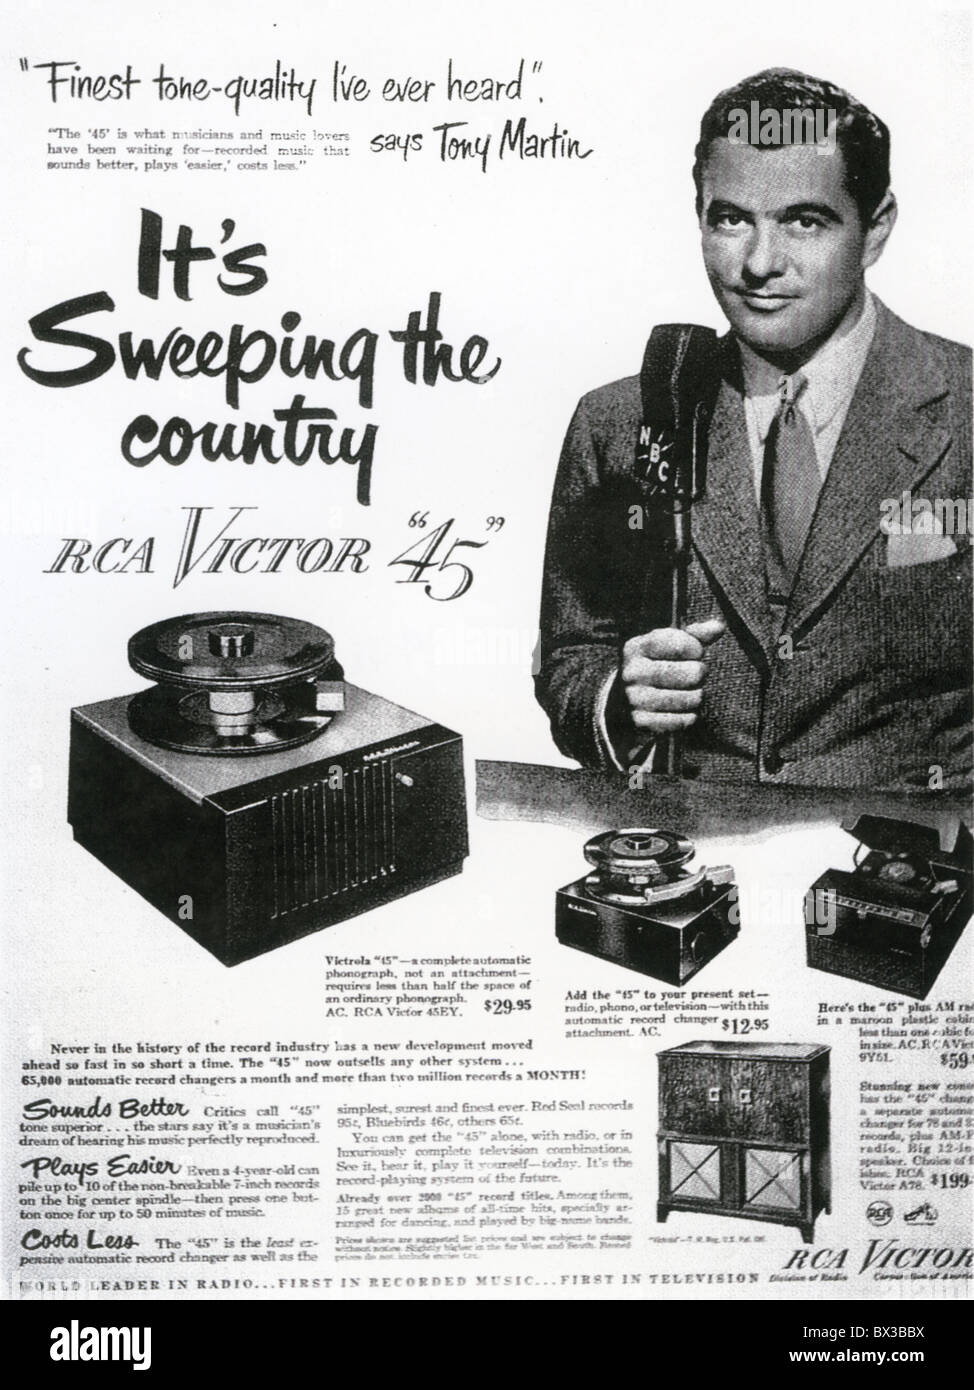 TONY MARTIN  US singer promoting the RCA Victor 45 record player in a 1948 advert Stock Photo